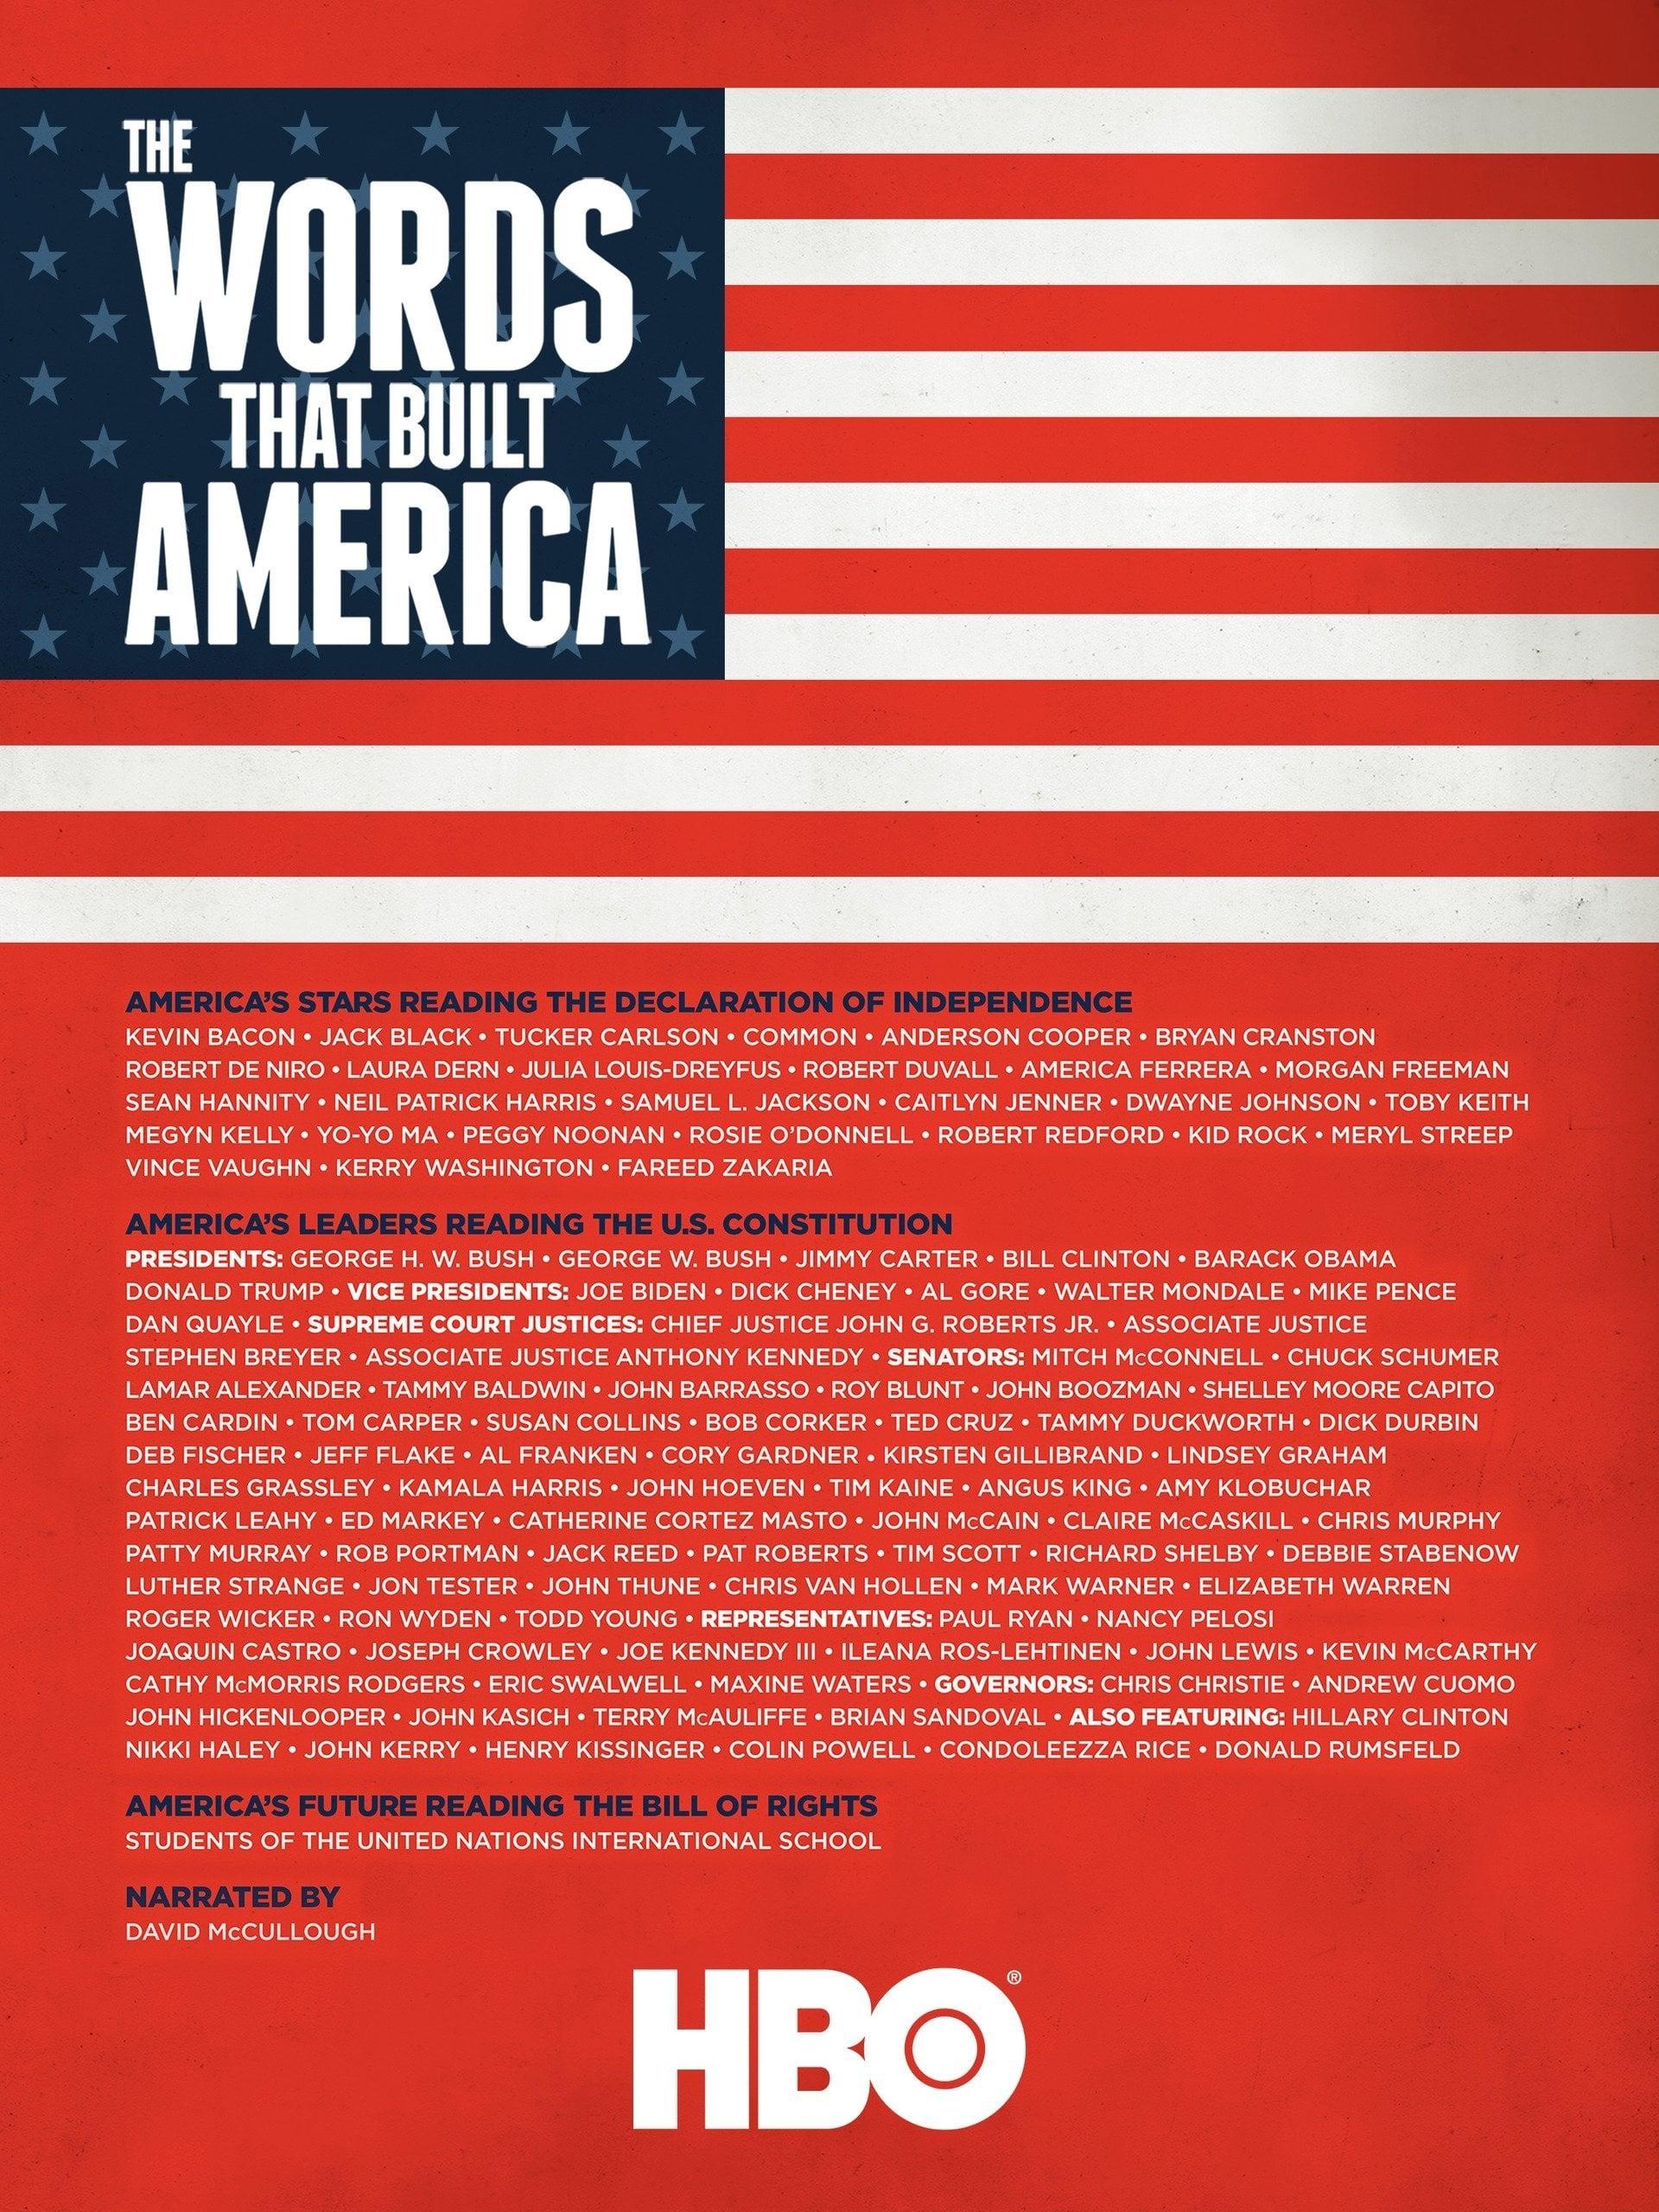 The Words That Built America poster